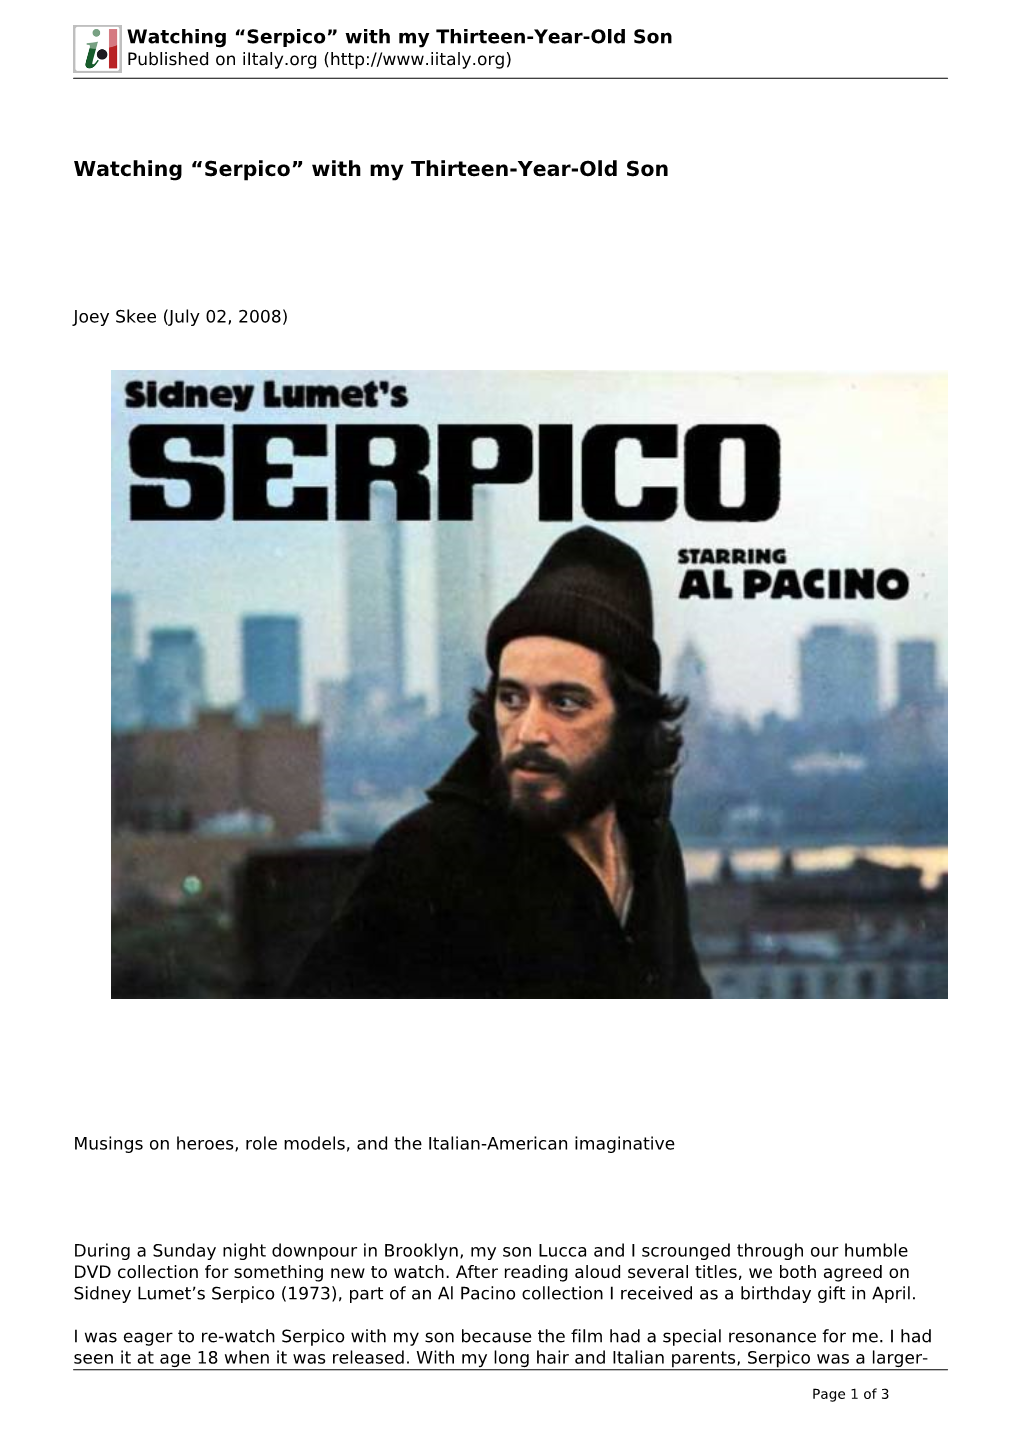 Watching “Serpico” with My Thirteen-Year-Old Son Published on Iitaly.Org (